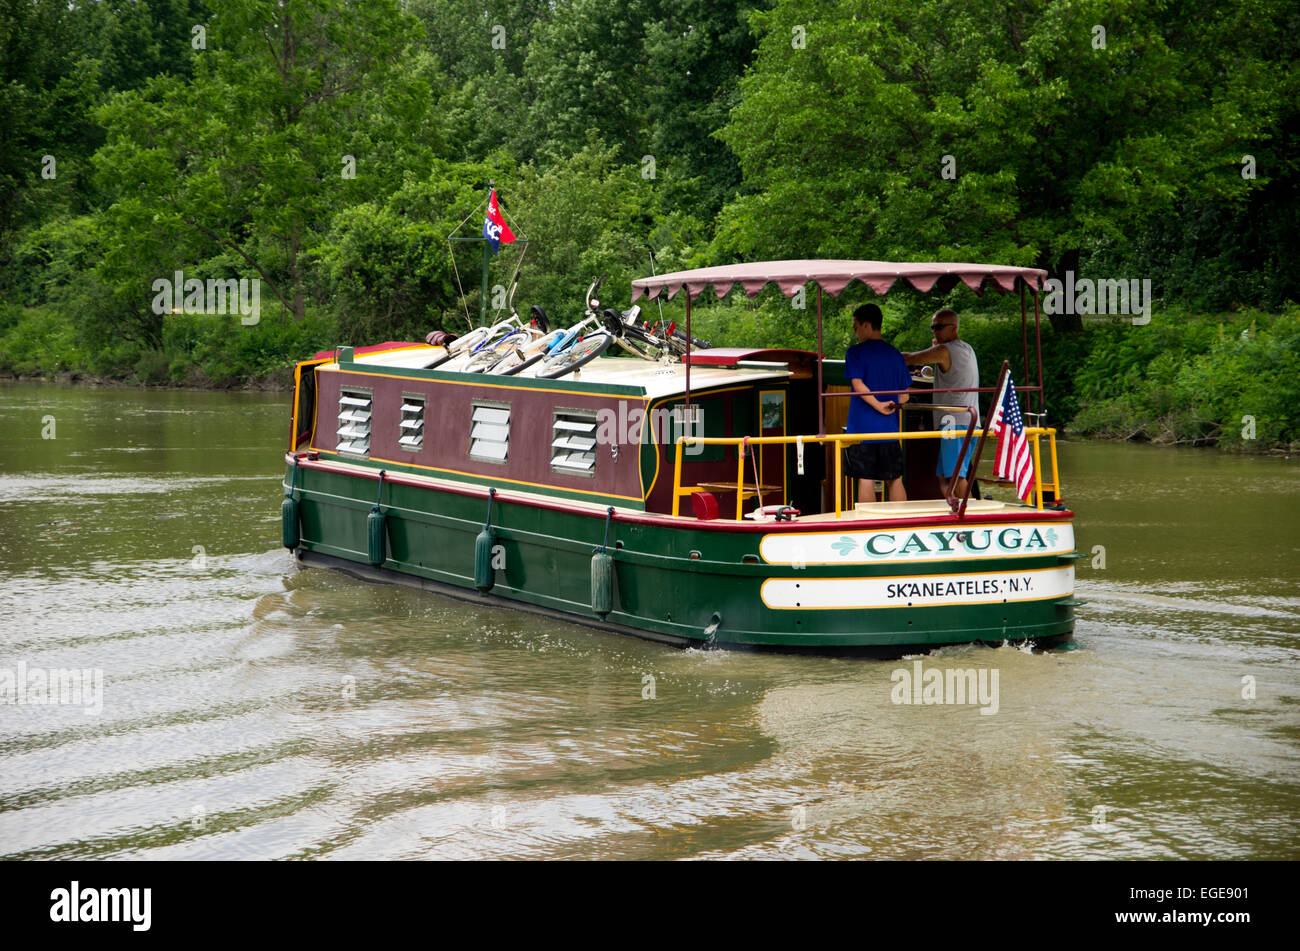 Charter cruises on Erie Canal. Two holiday makers drive from stern, back of the boat. Stock Photo